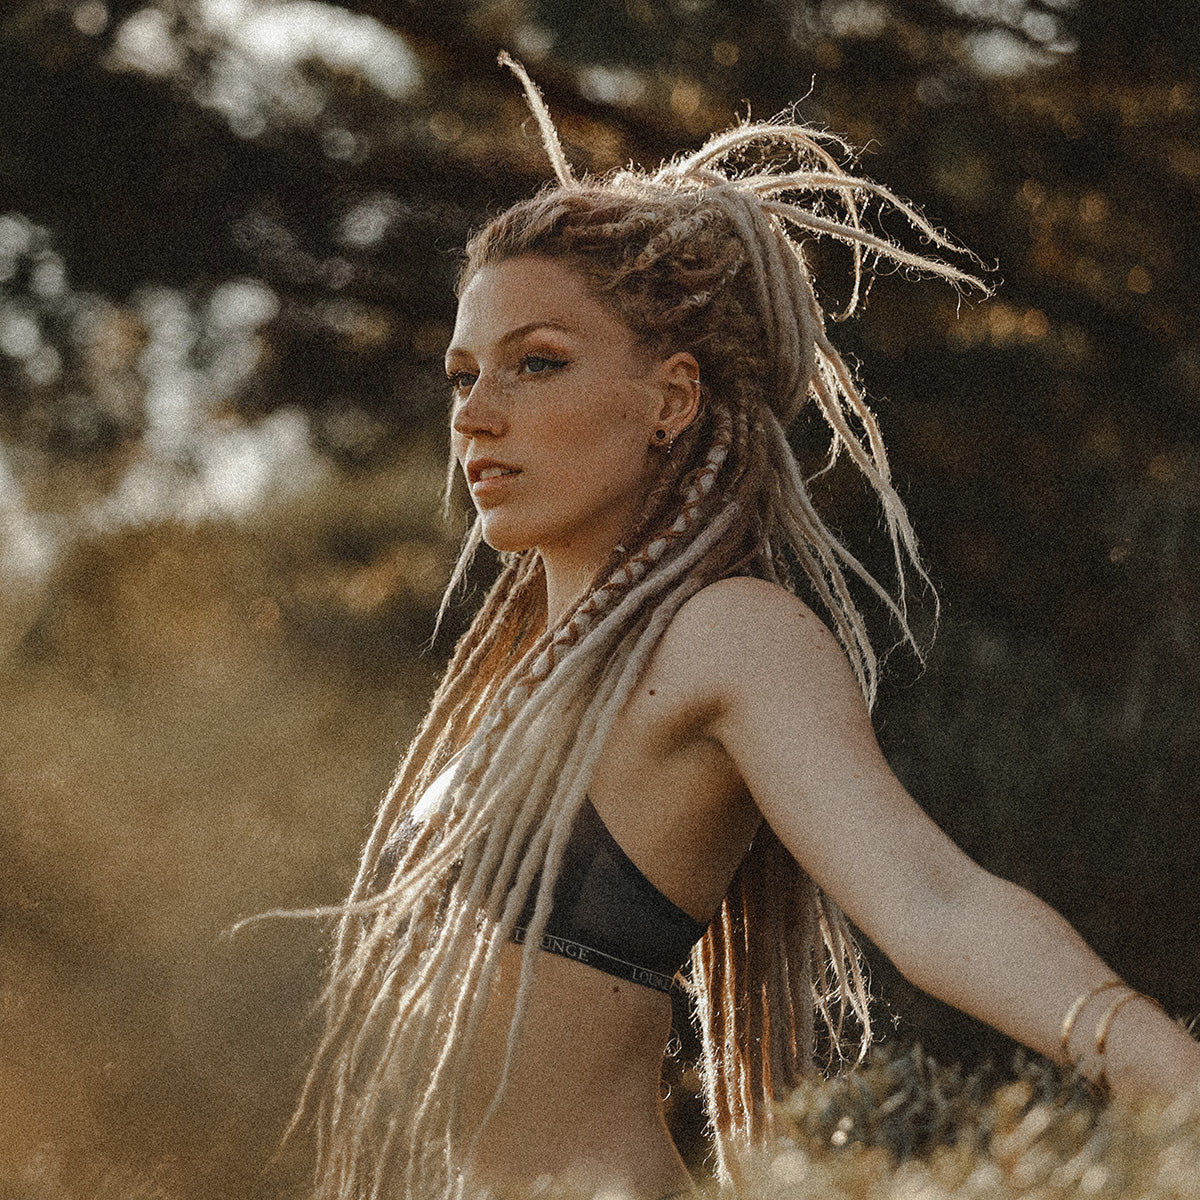 Can I wear Dreads if I exercise a lot?